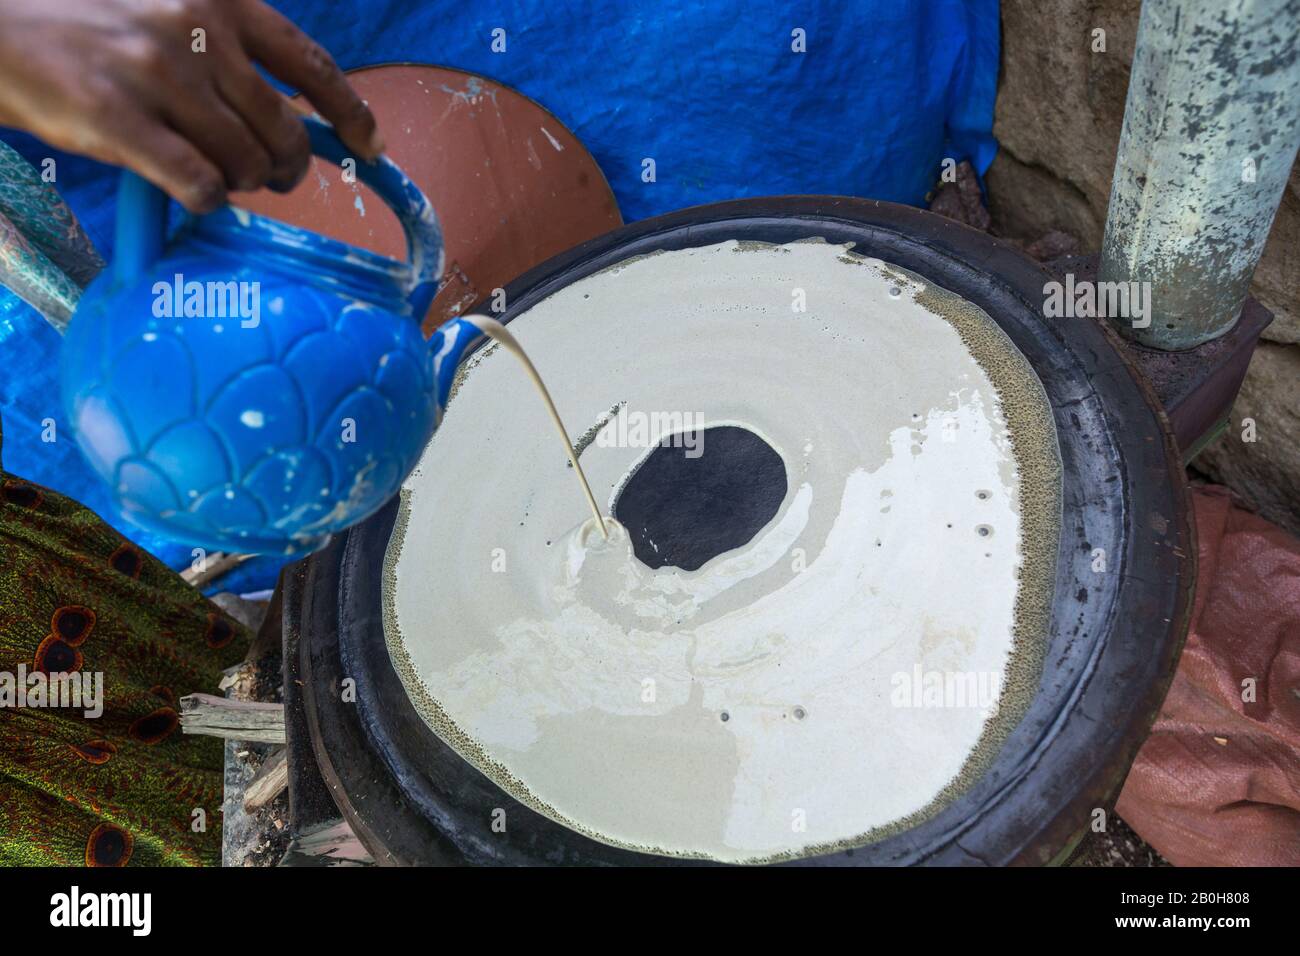 07.11.2019, Adama, Oromiyaa, Ethiopia - Production of the local sourdough bread Indjira. The liquid dough is poured onto a hot metal plate. Women and Stock Photo